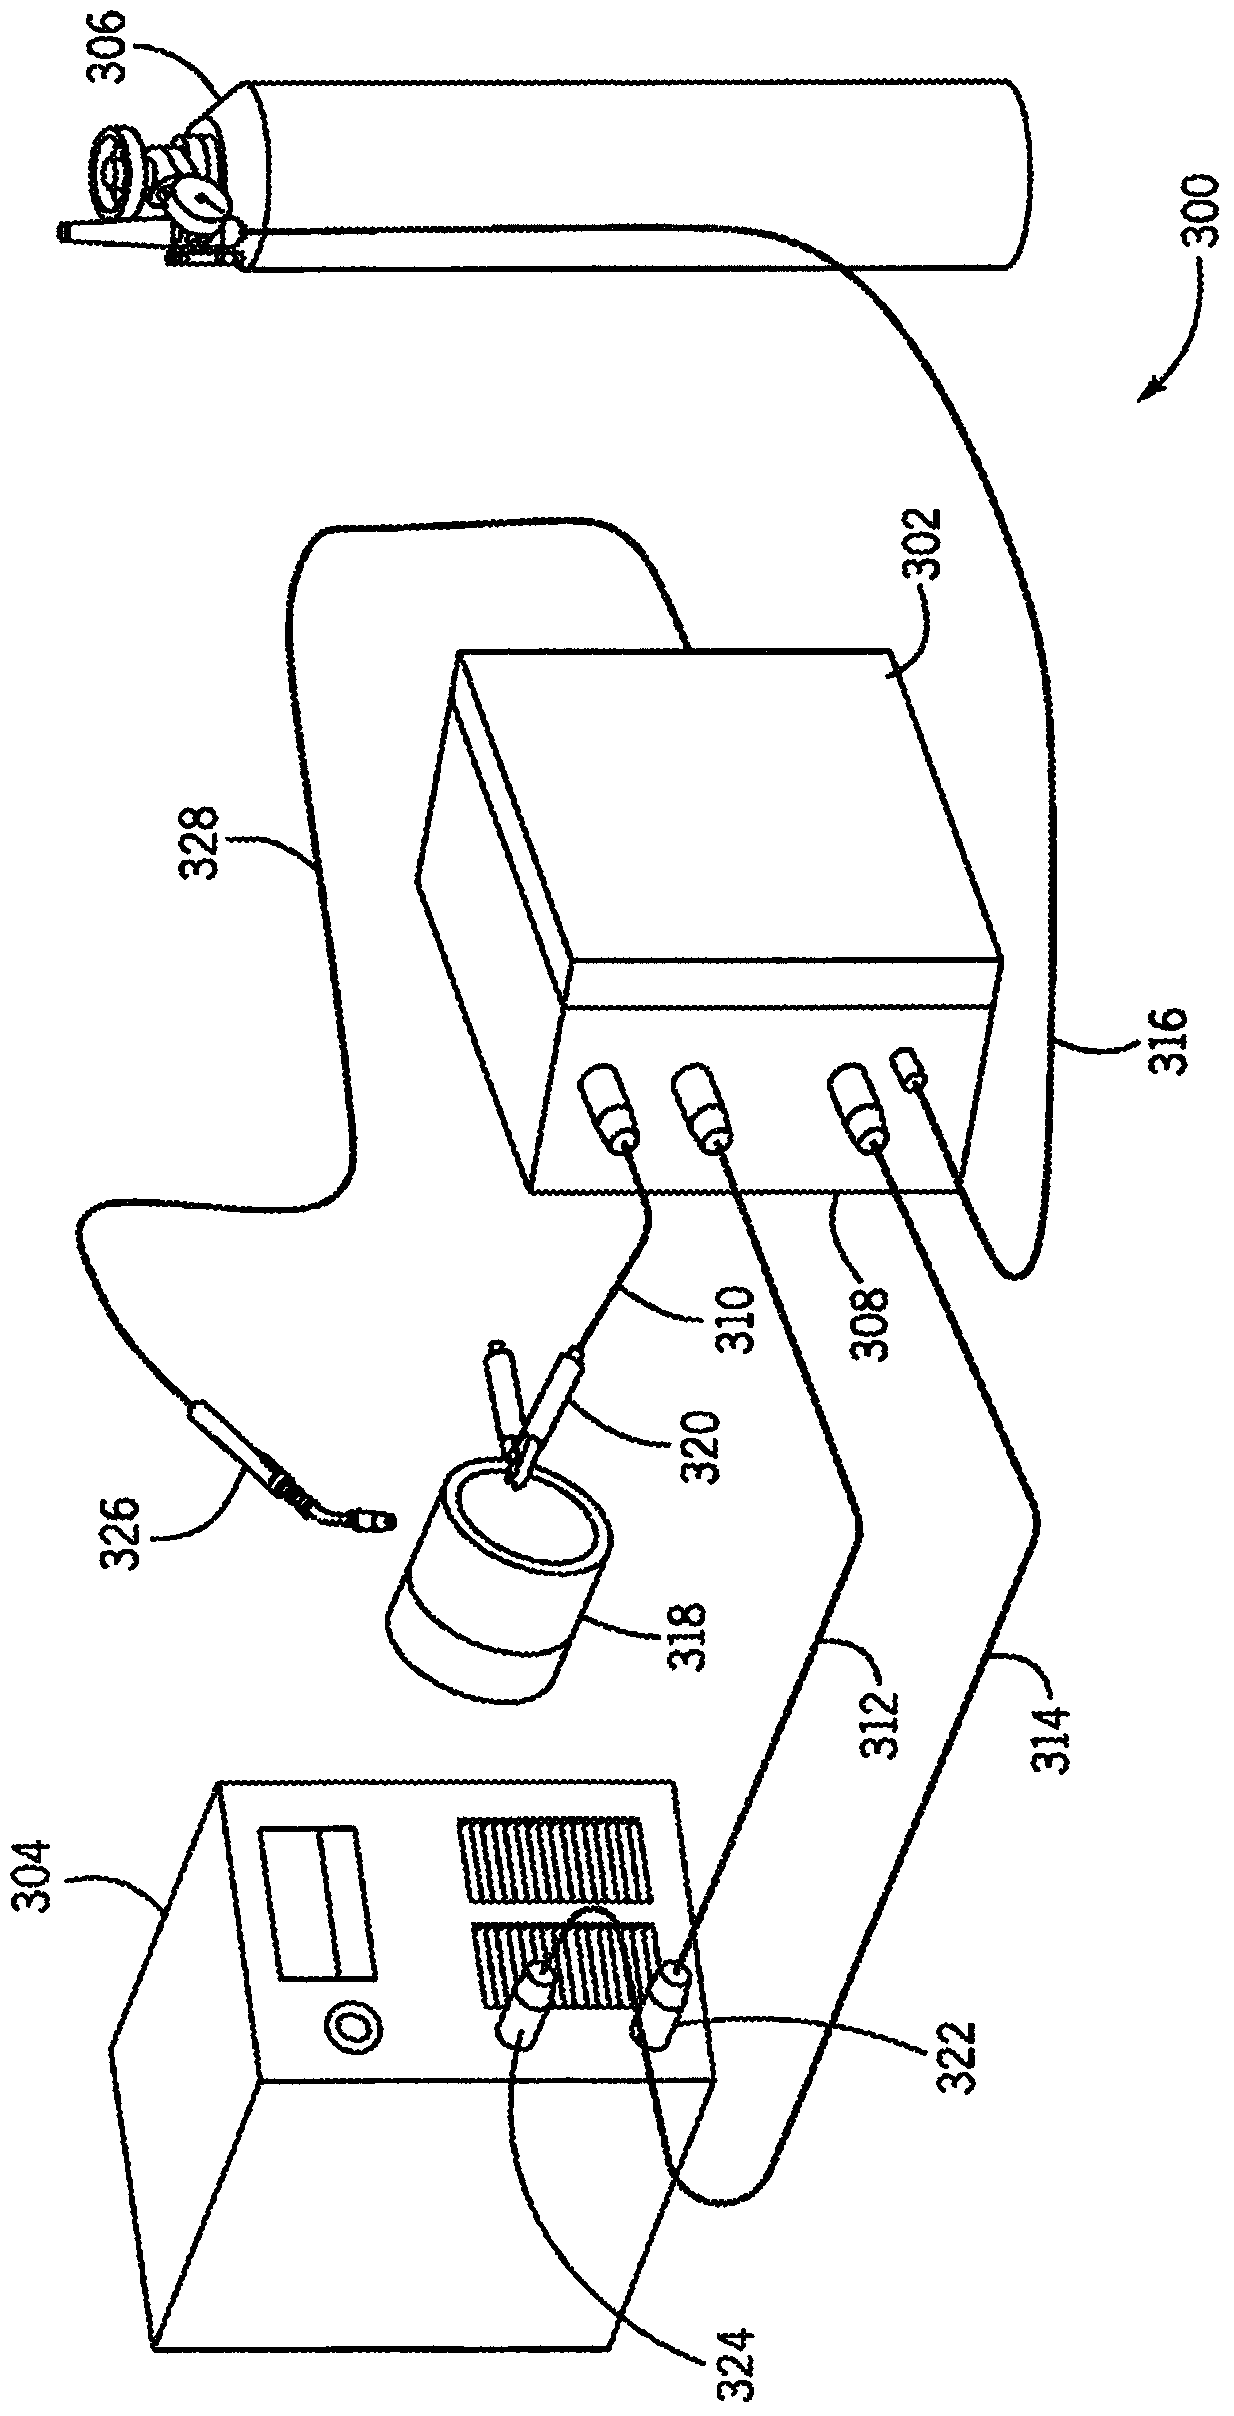 Systems and methods for replaceable mechanically mounted male input power connections